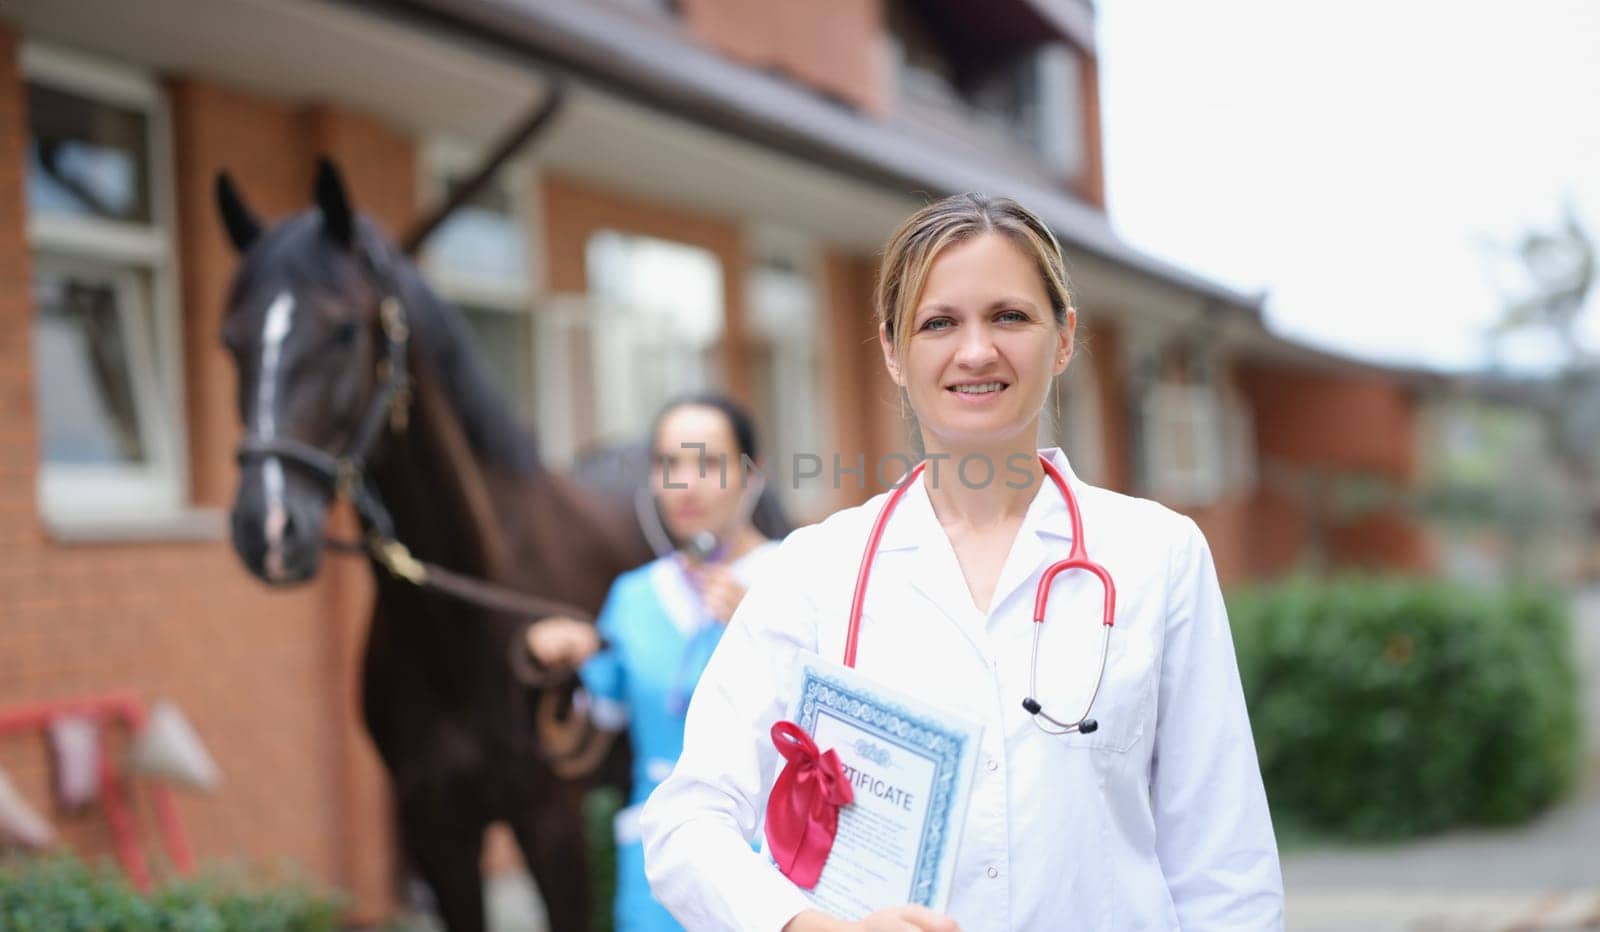 Veterinarian doctor holds horse certificate in background by kuprevich